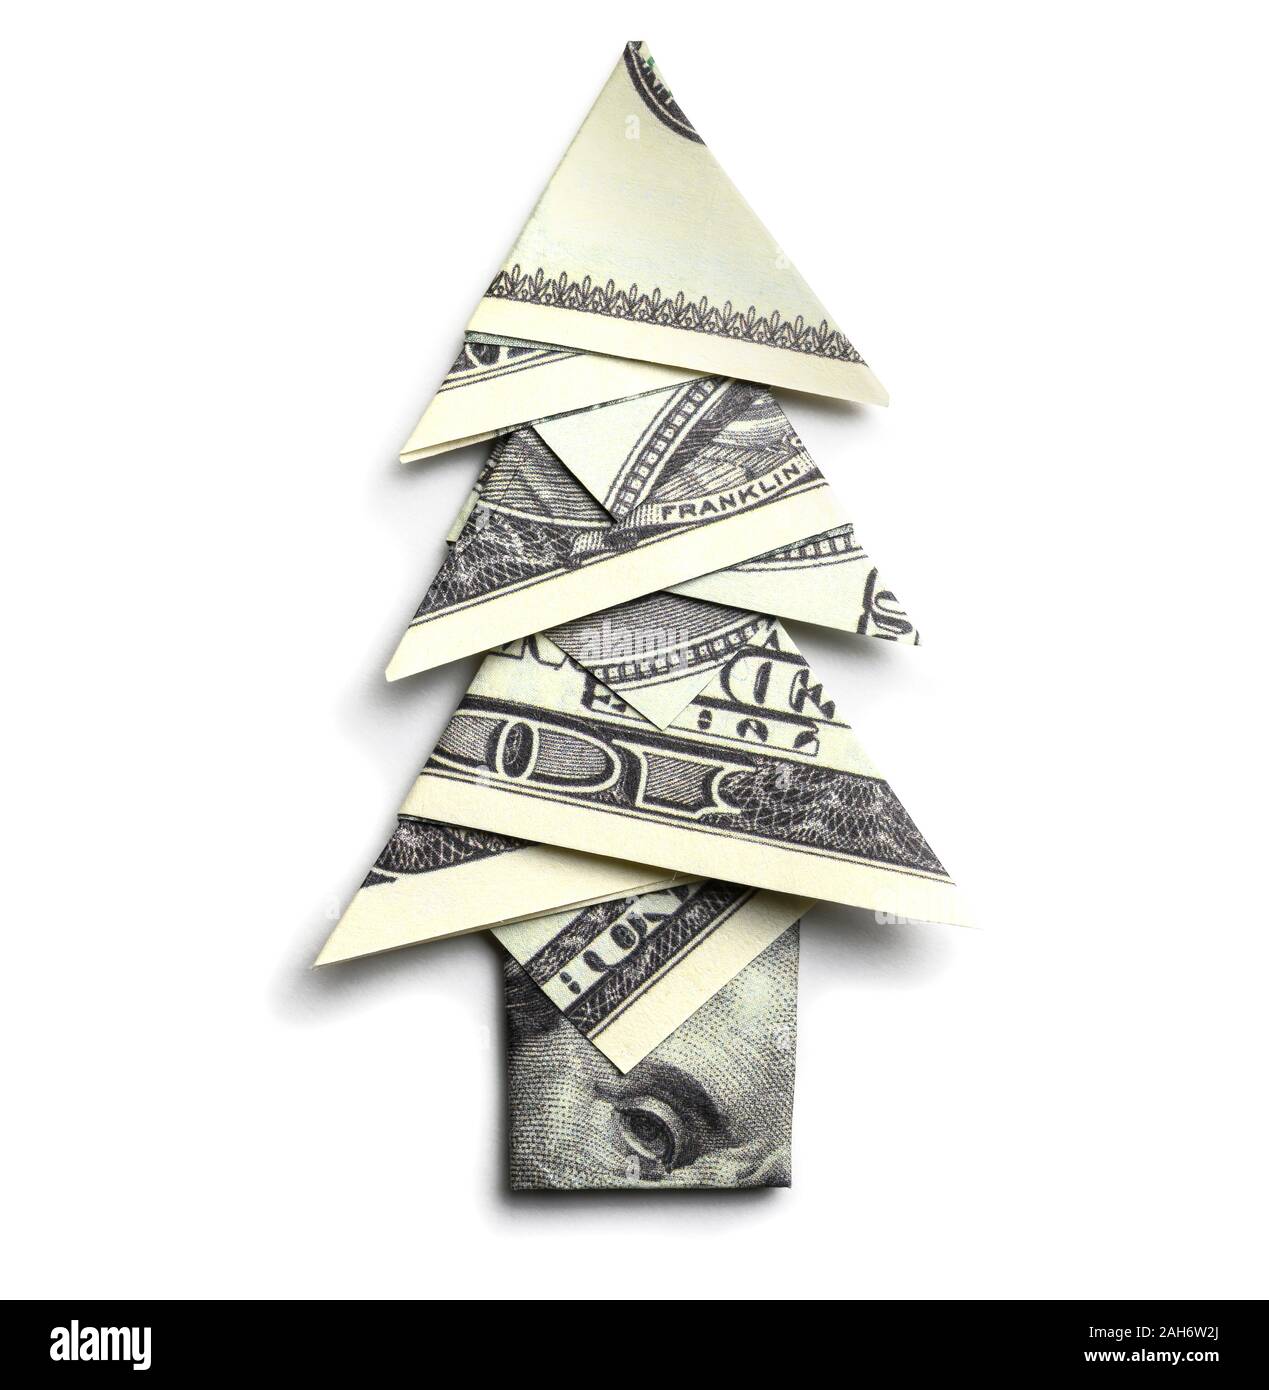 100 us dollars in the shape of a Christmas tree on a white background Stock Photo